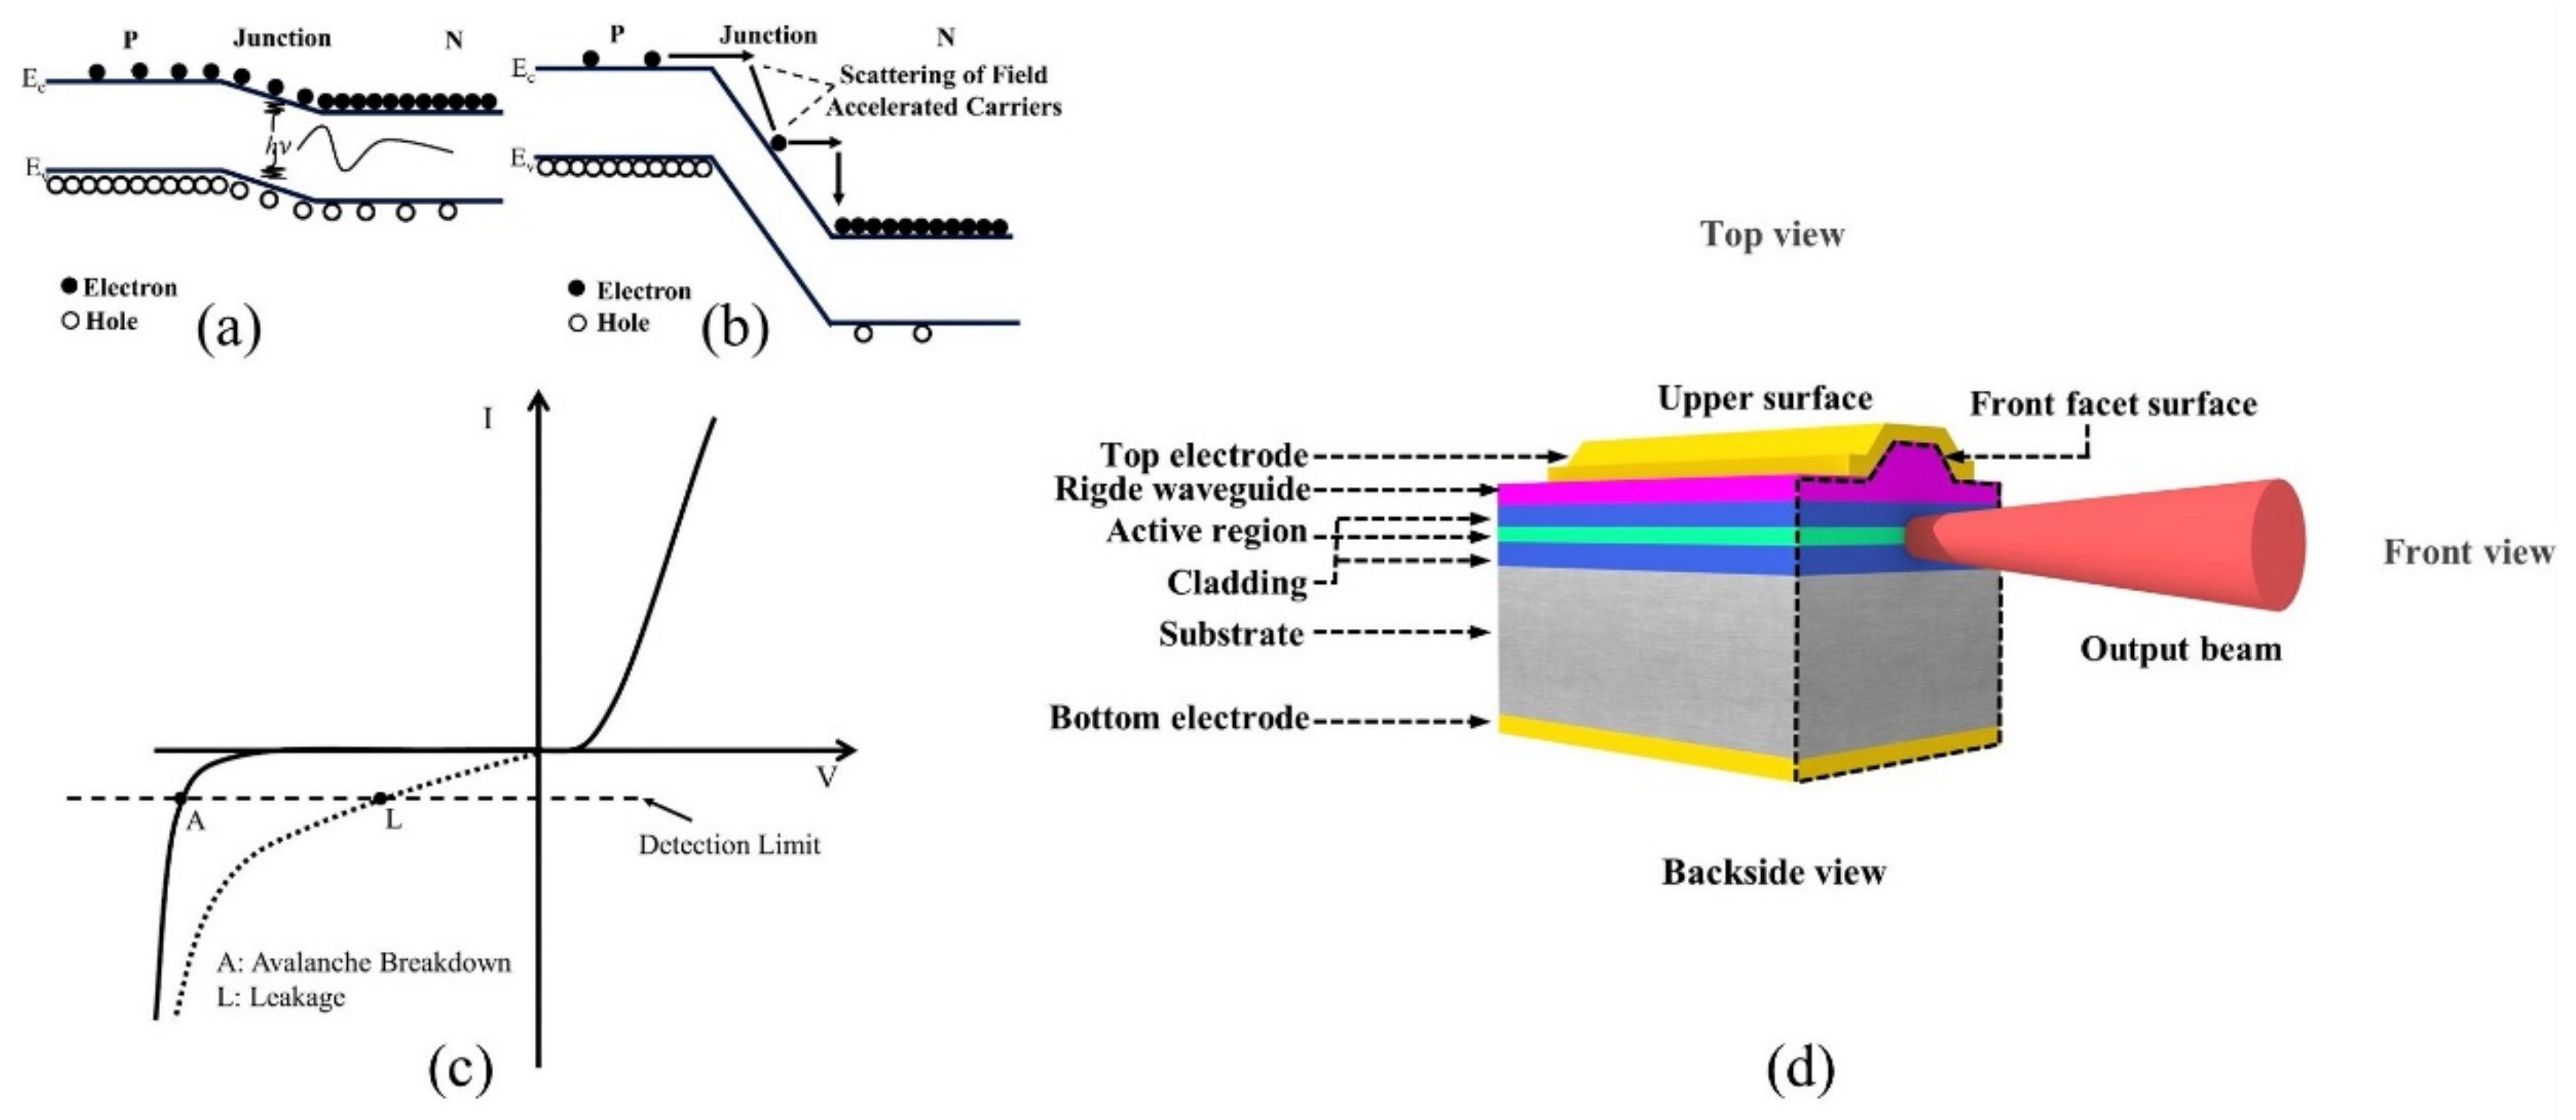 Photonics | Free Full-Text | Effective Failure Analysis for Packaged  Semiconductor Lasers with a Simple Sample Preparation and Home-Made PEM  System